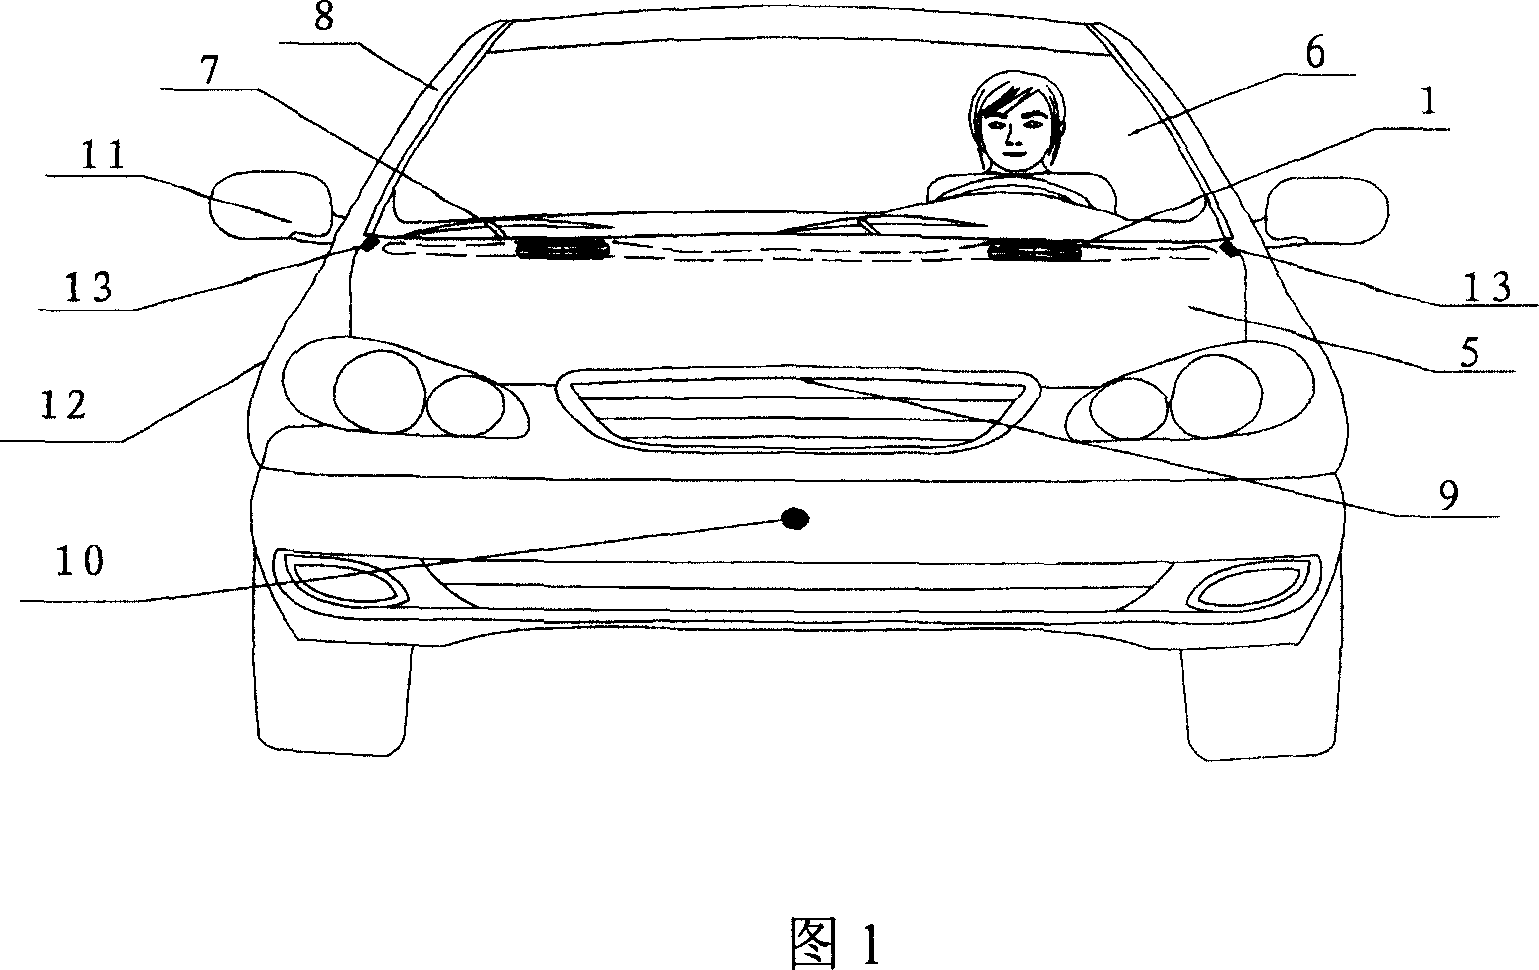 Vehicle with pedestrian protecting mechanism